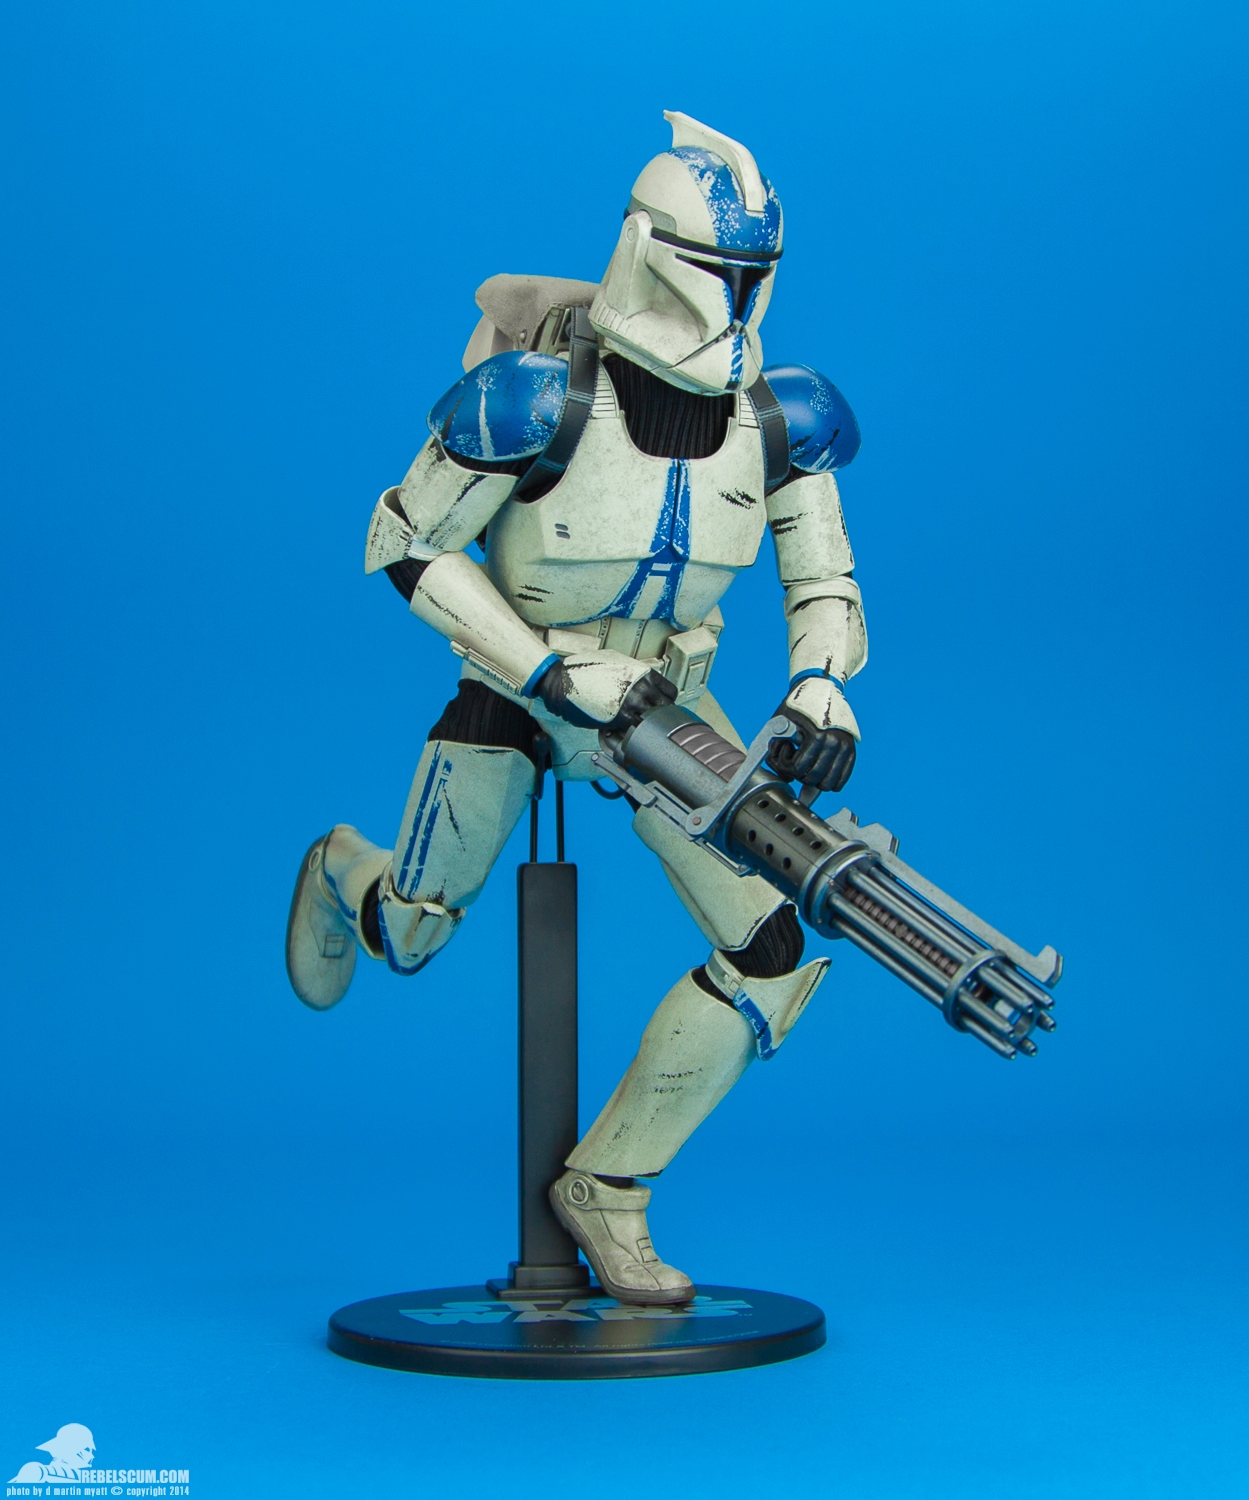 Clone-Trooper-Deluxe-501st-Sixth-Scale-Figure-Sideshow-015.jpg